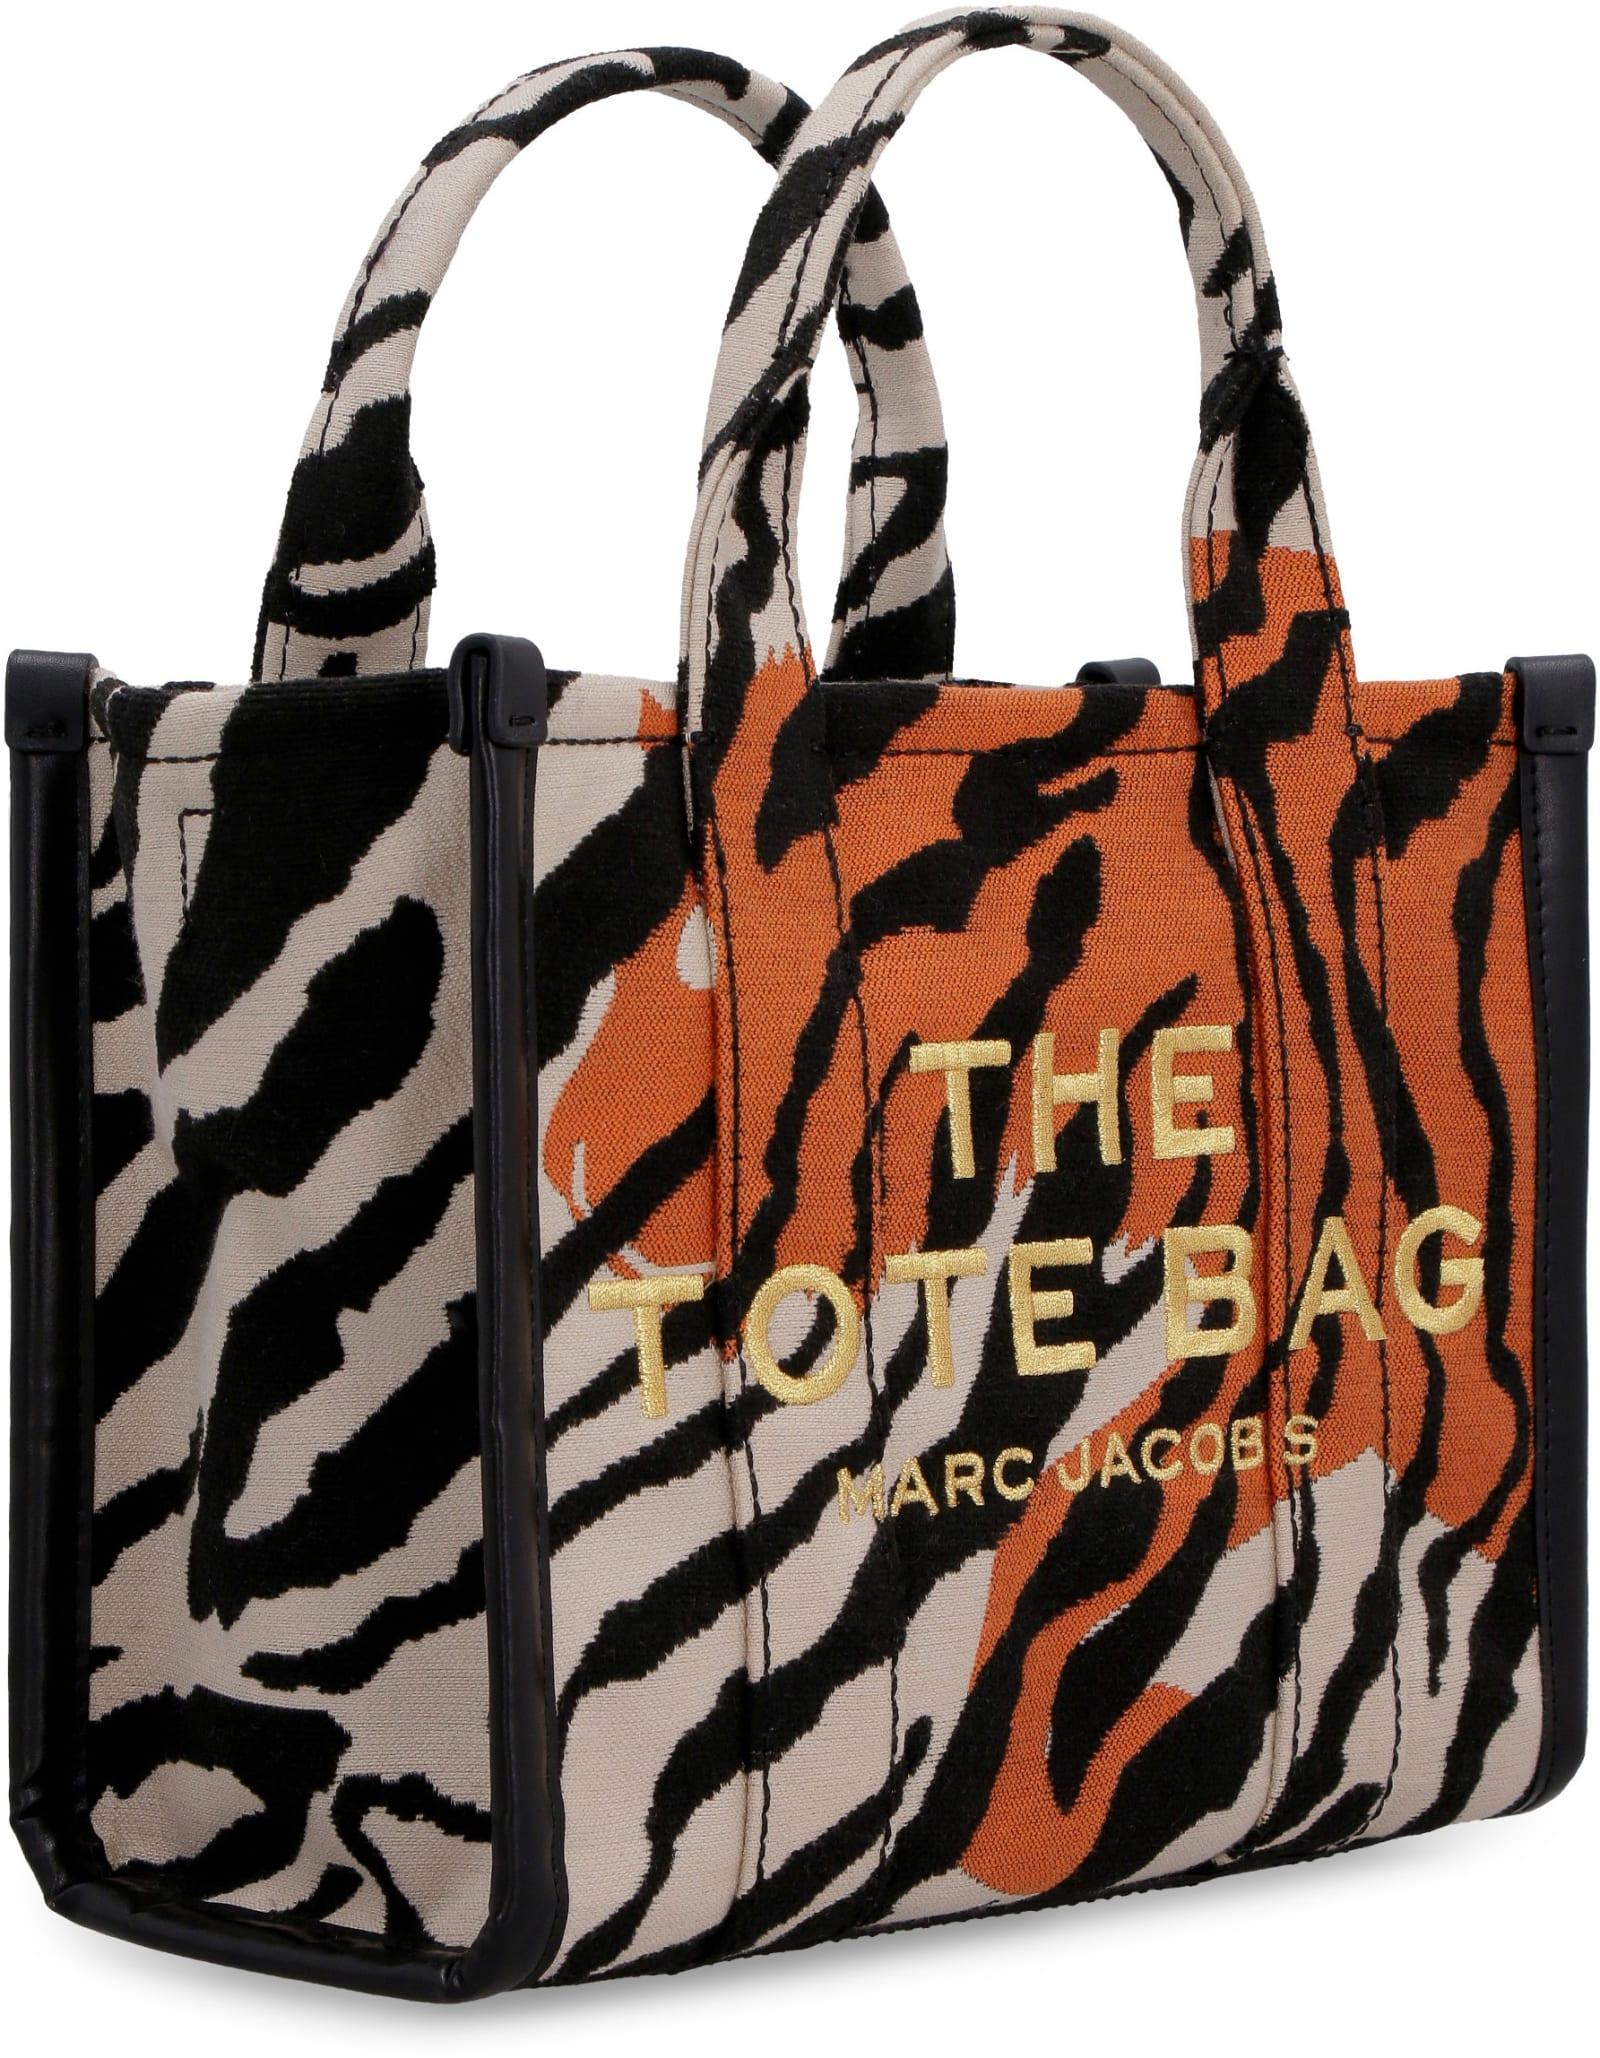 Marc Jacobs Tote Animal Print Bag Bags Purses Tote -  New Zealand